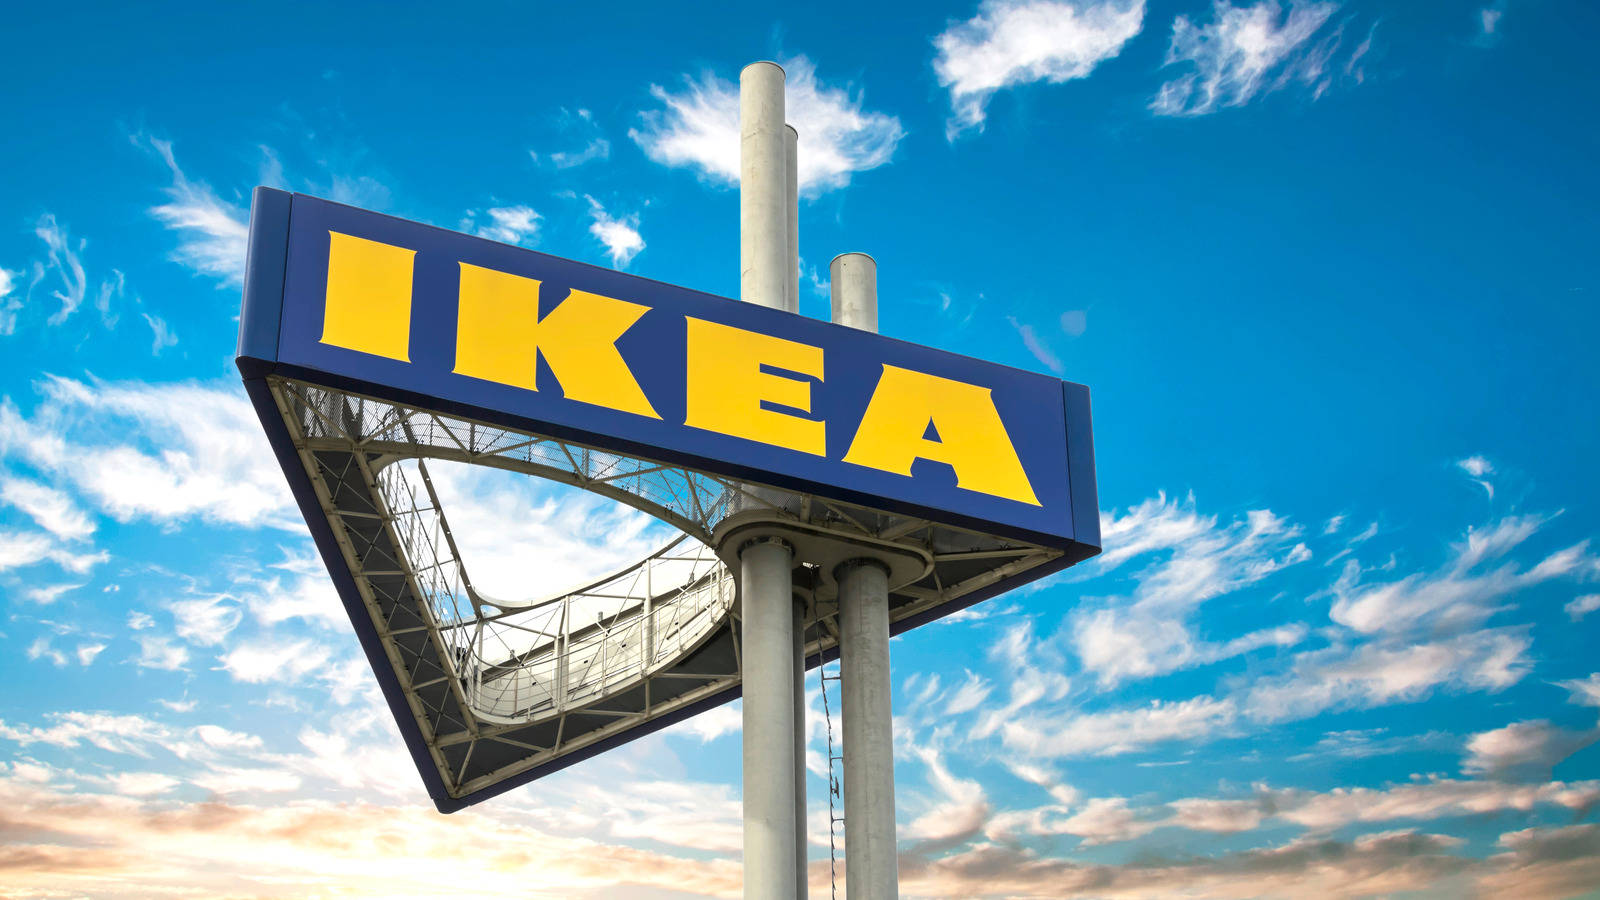 Ikea Signage Over Cloud Background Wallpaper